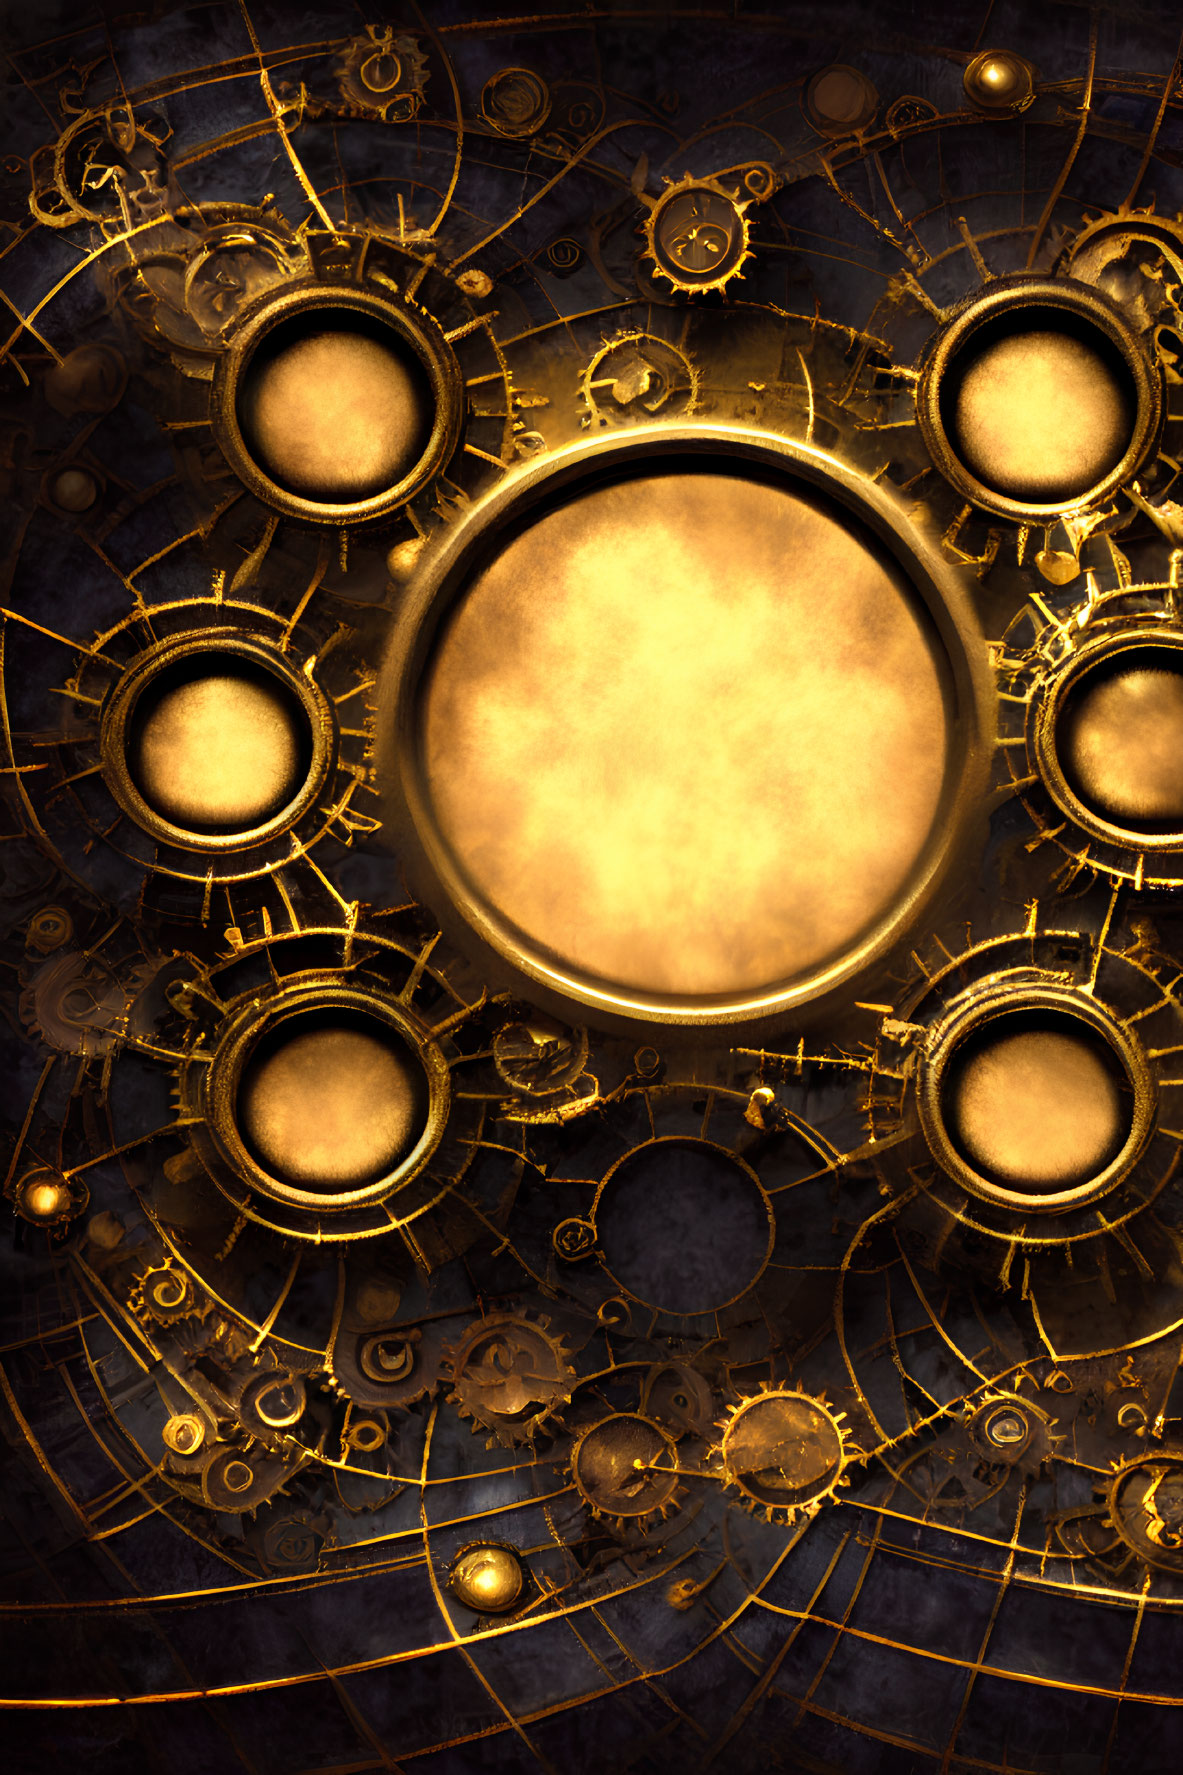 Steampunk-inspired background with gold and brass gears and glowing orb